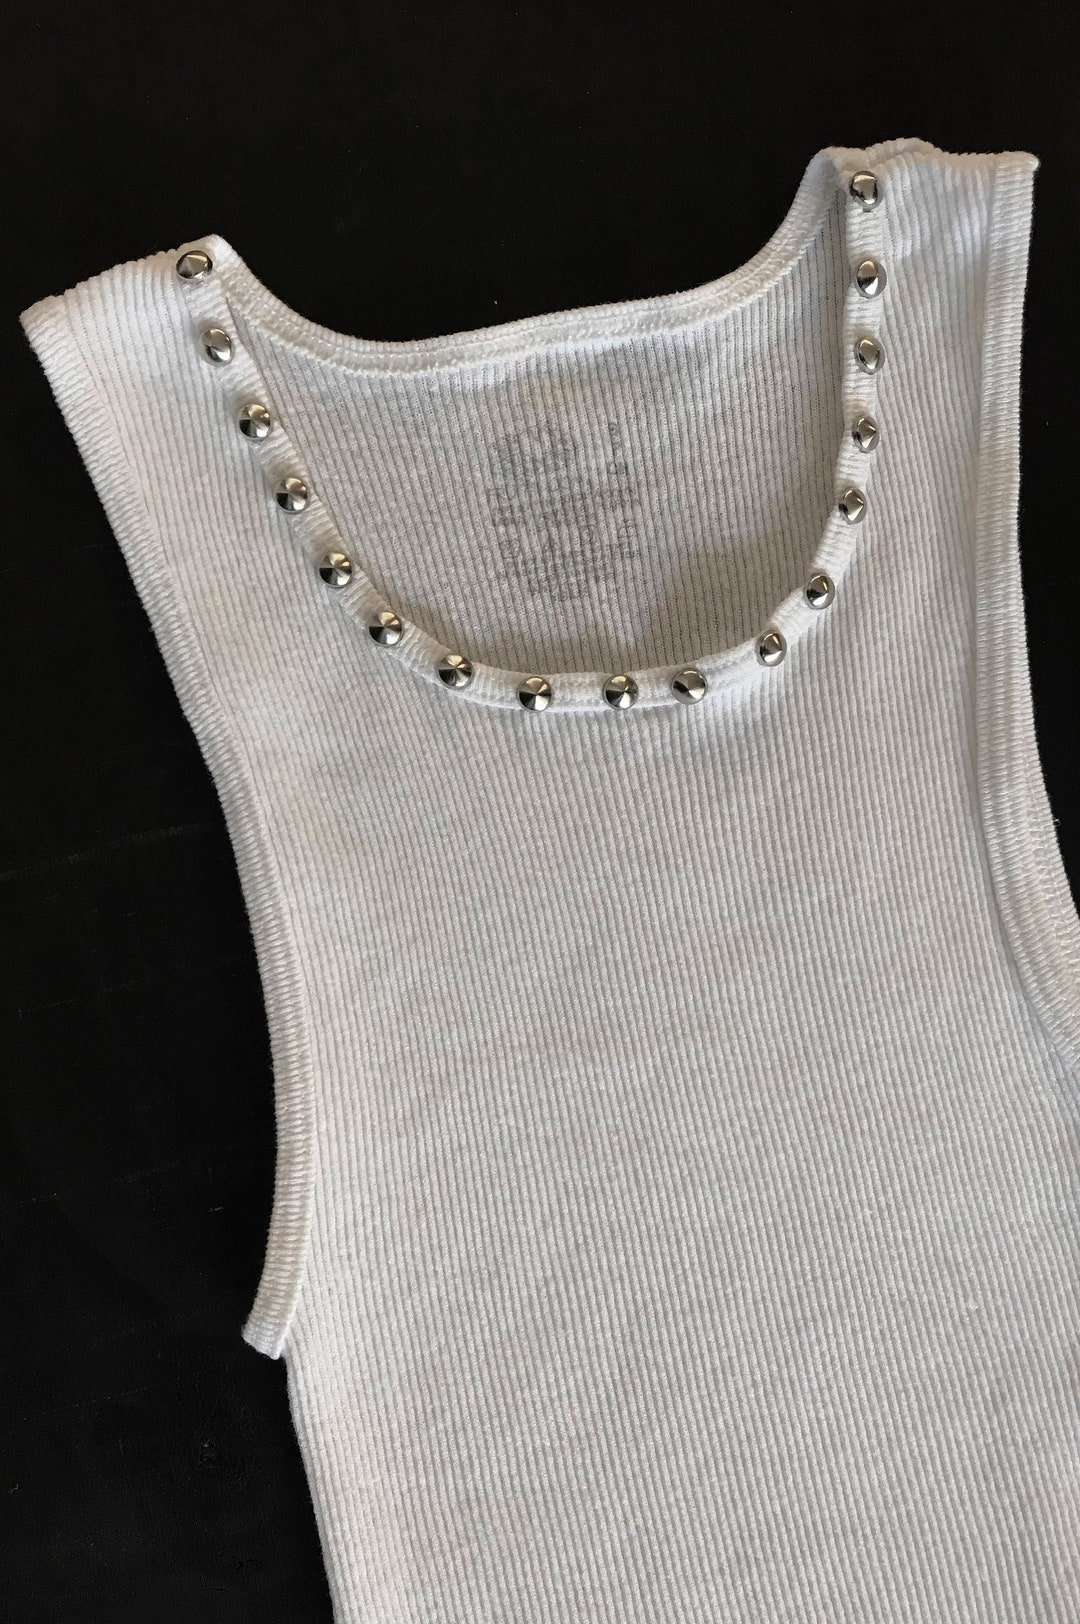 ADD ON Punk Rock Lies / Add Silver Studded Collar Neck Trim to ANY ...